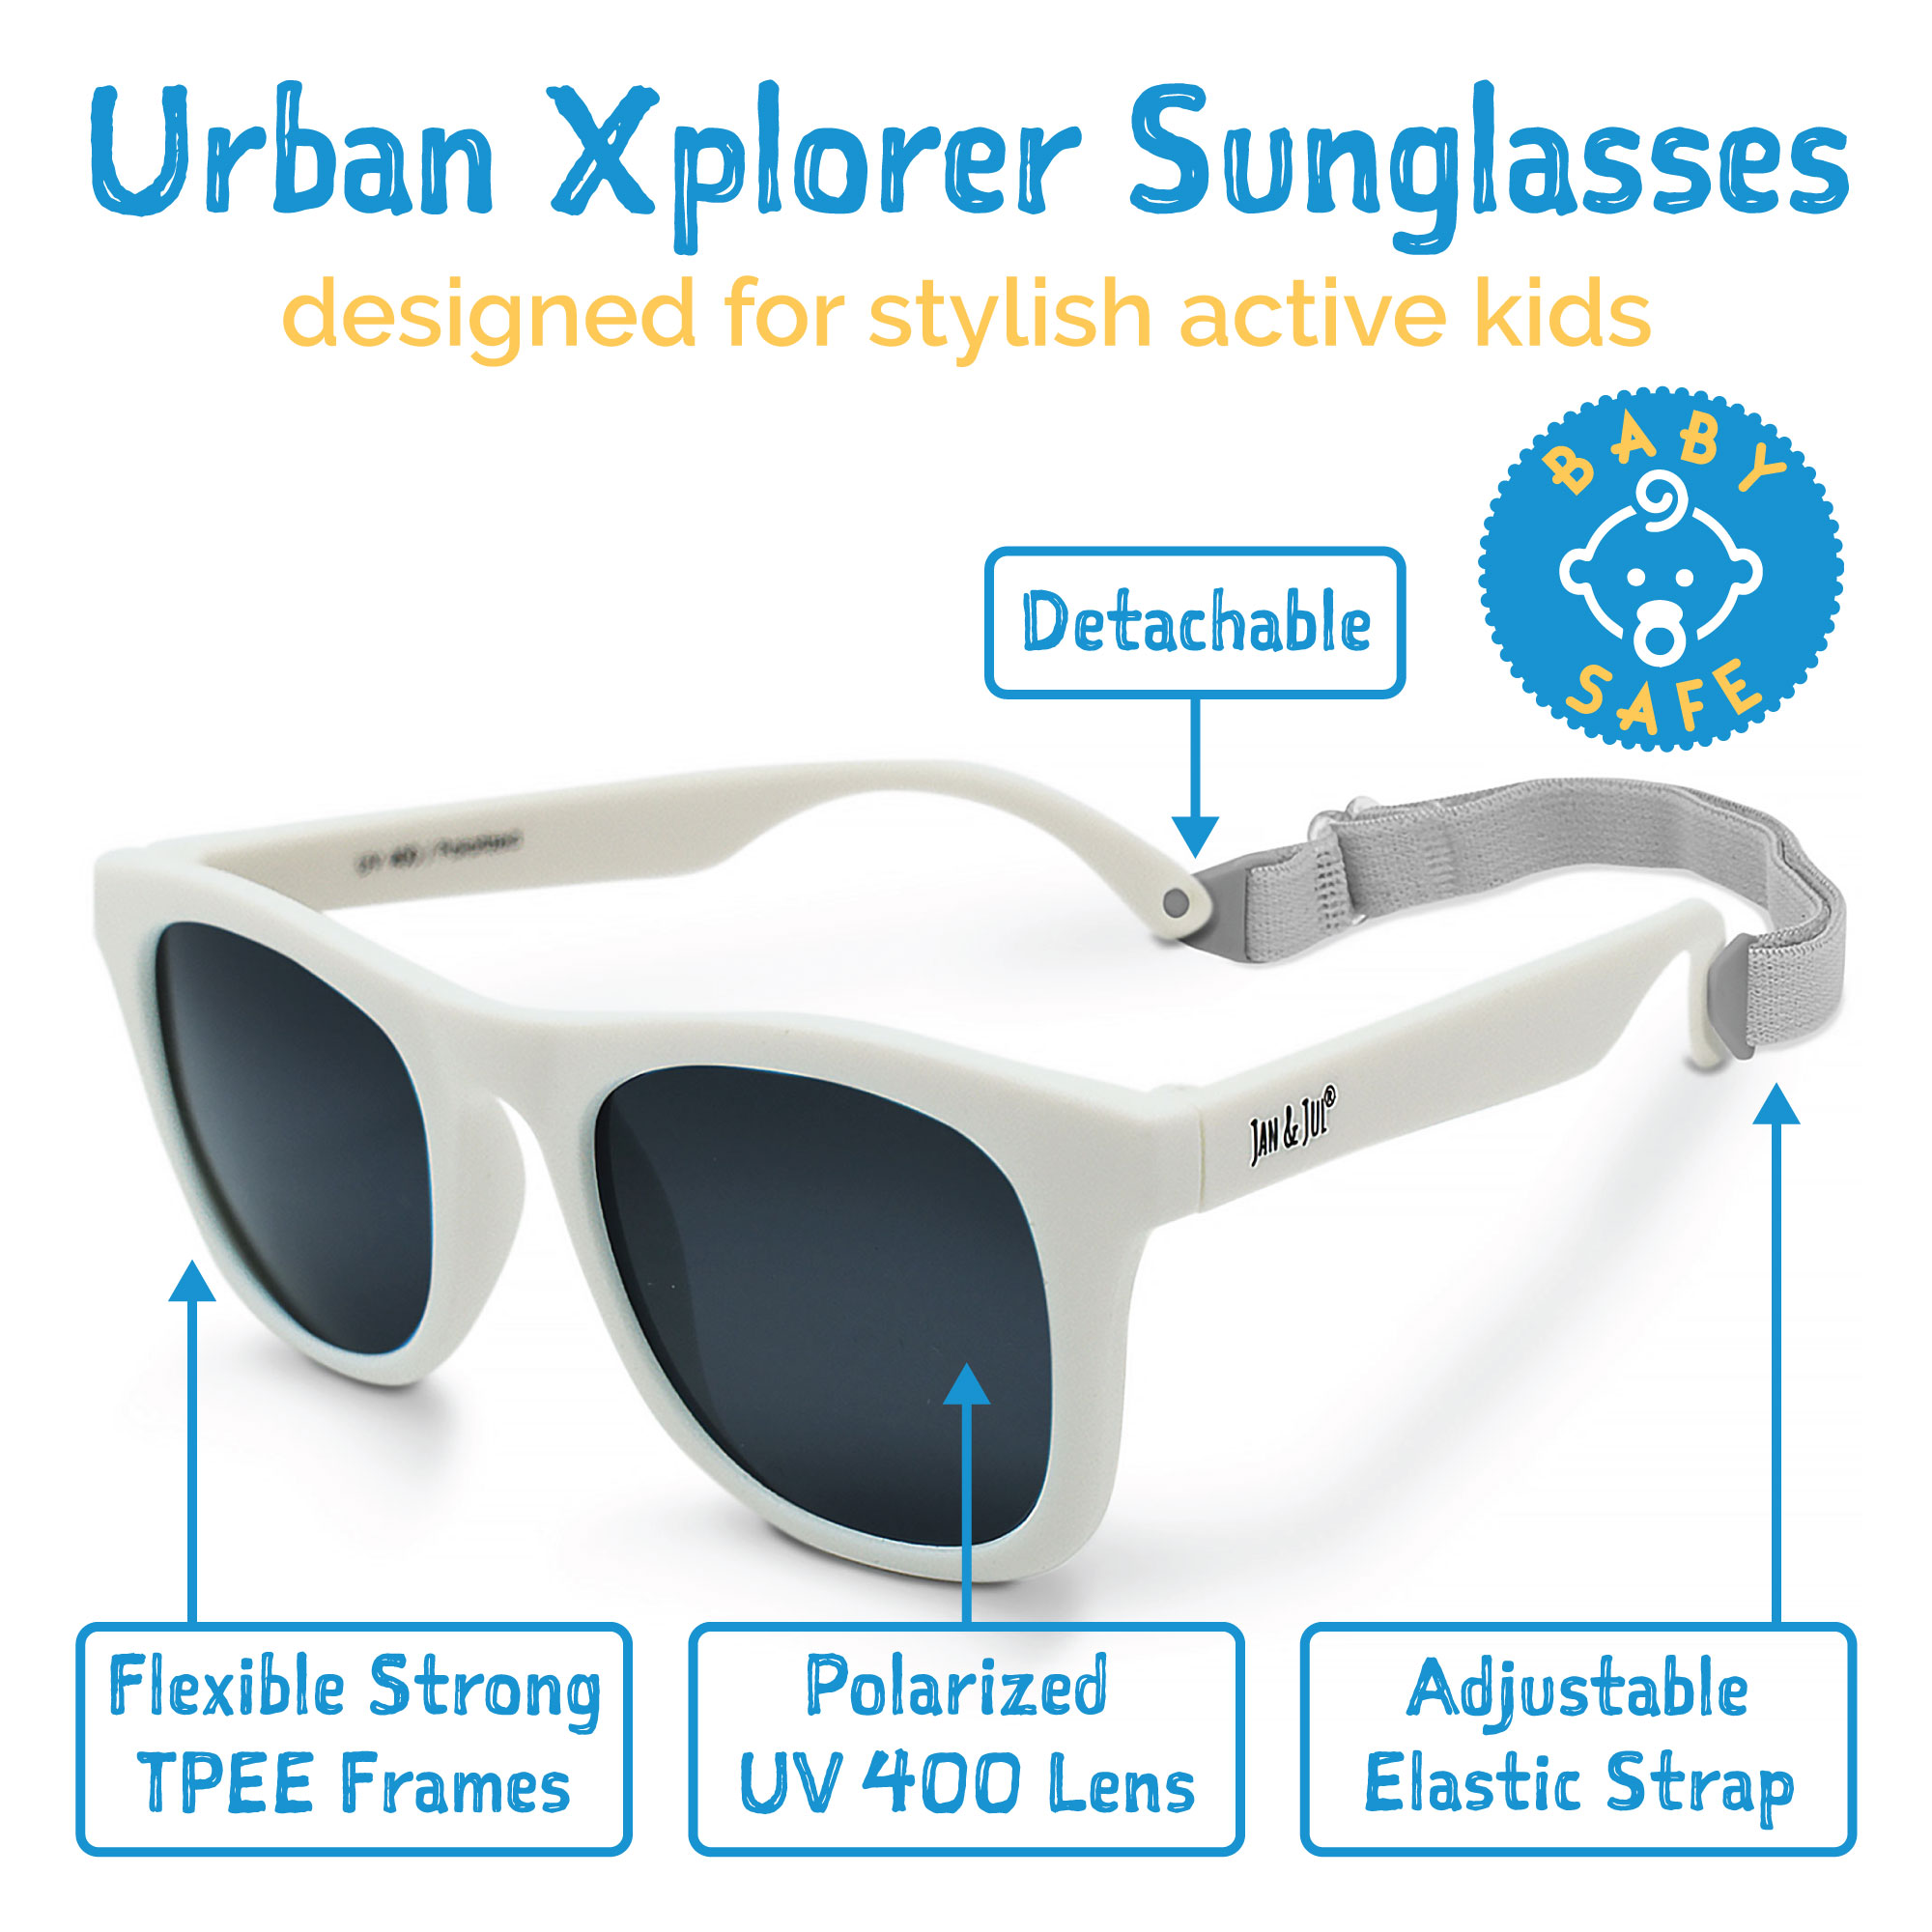 Jan & Jul Infant Sunglasses with Strap, Polarized UV400 Protection (S: 6 Months -2 Years, White) - image 2 of 7